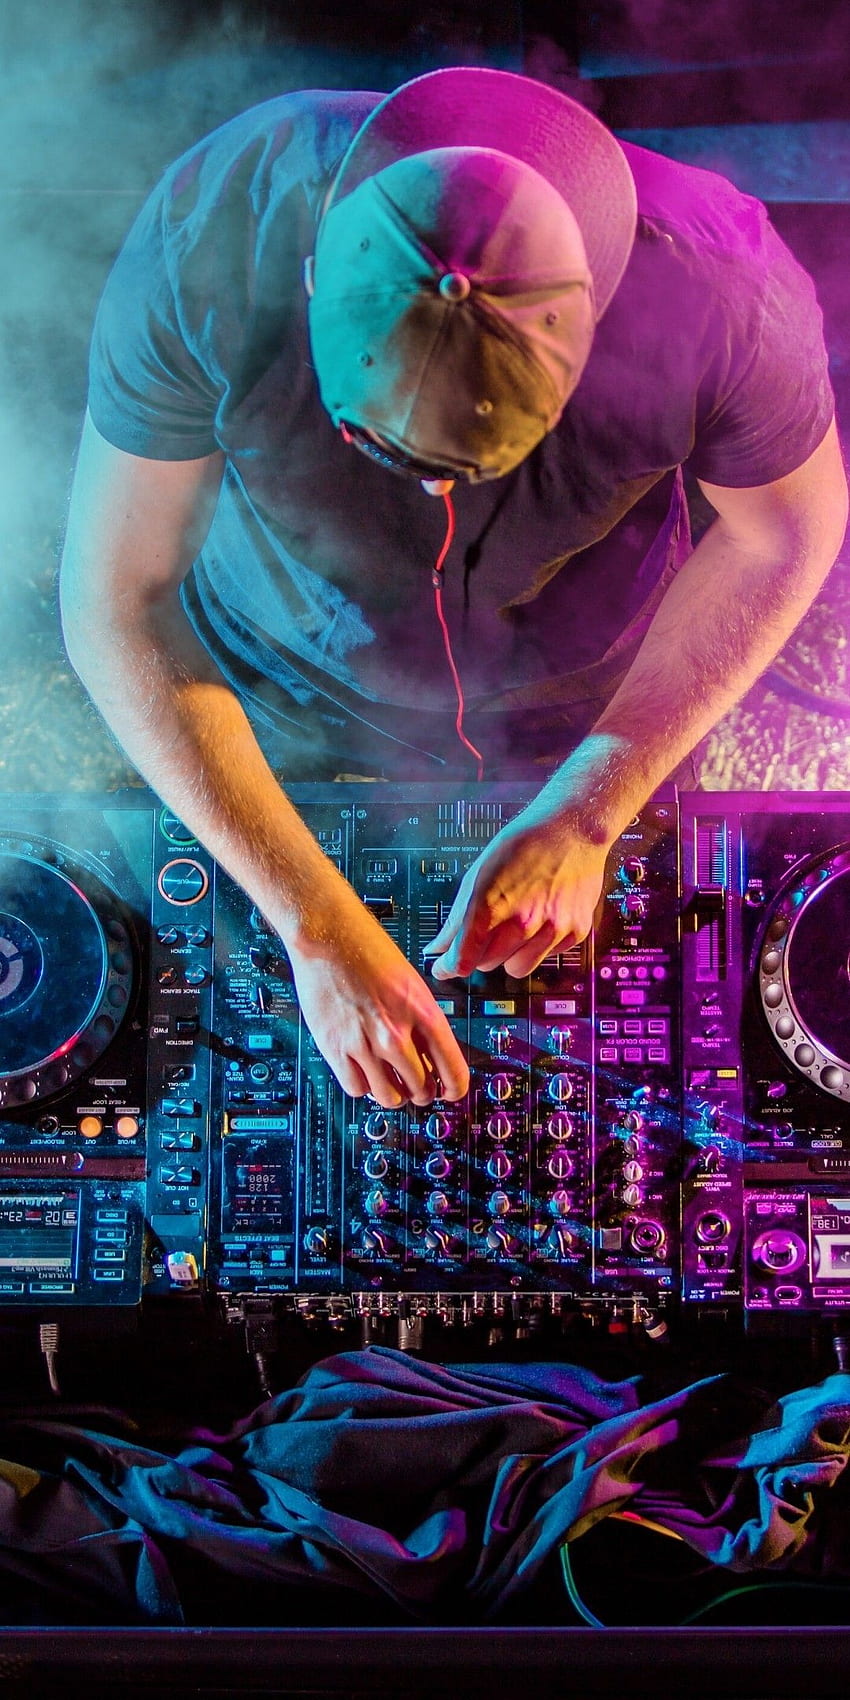 Dj, Music Producer, Stage, Dj Controller, Mixing For Huawei Mate 10 Hd  Phone Wallpaper | Pxfuel